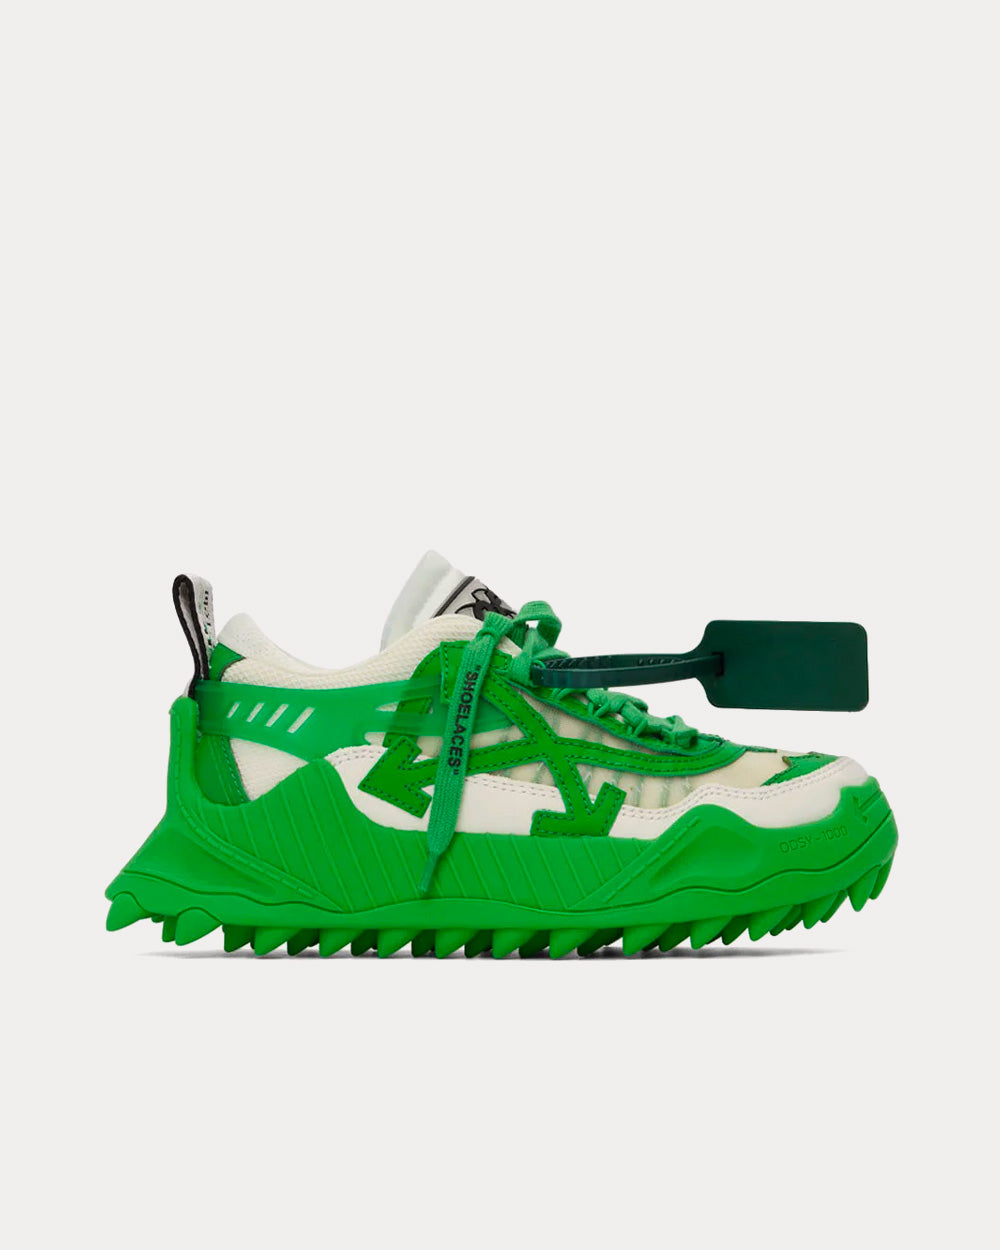 ODSY-1000 SNEAKERS in green